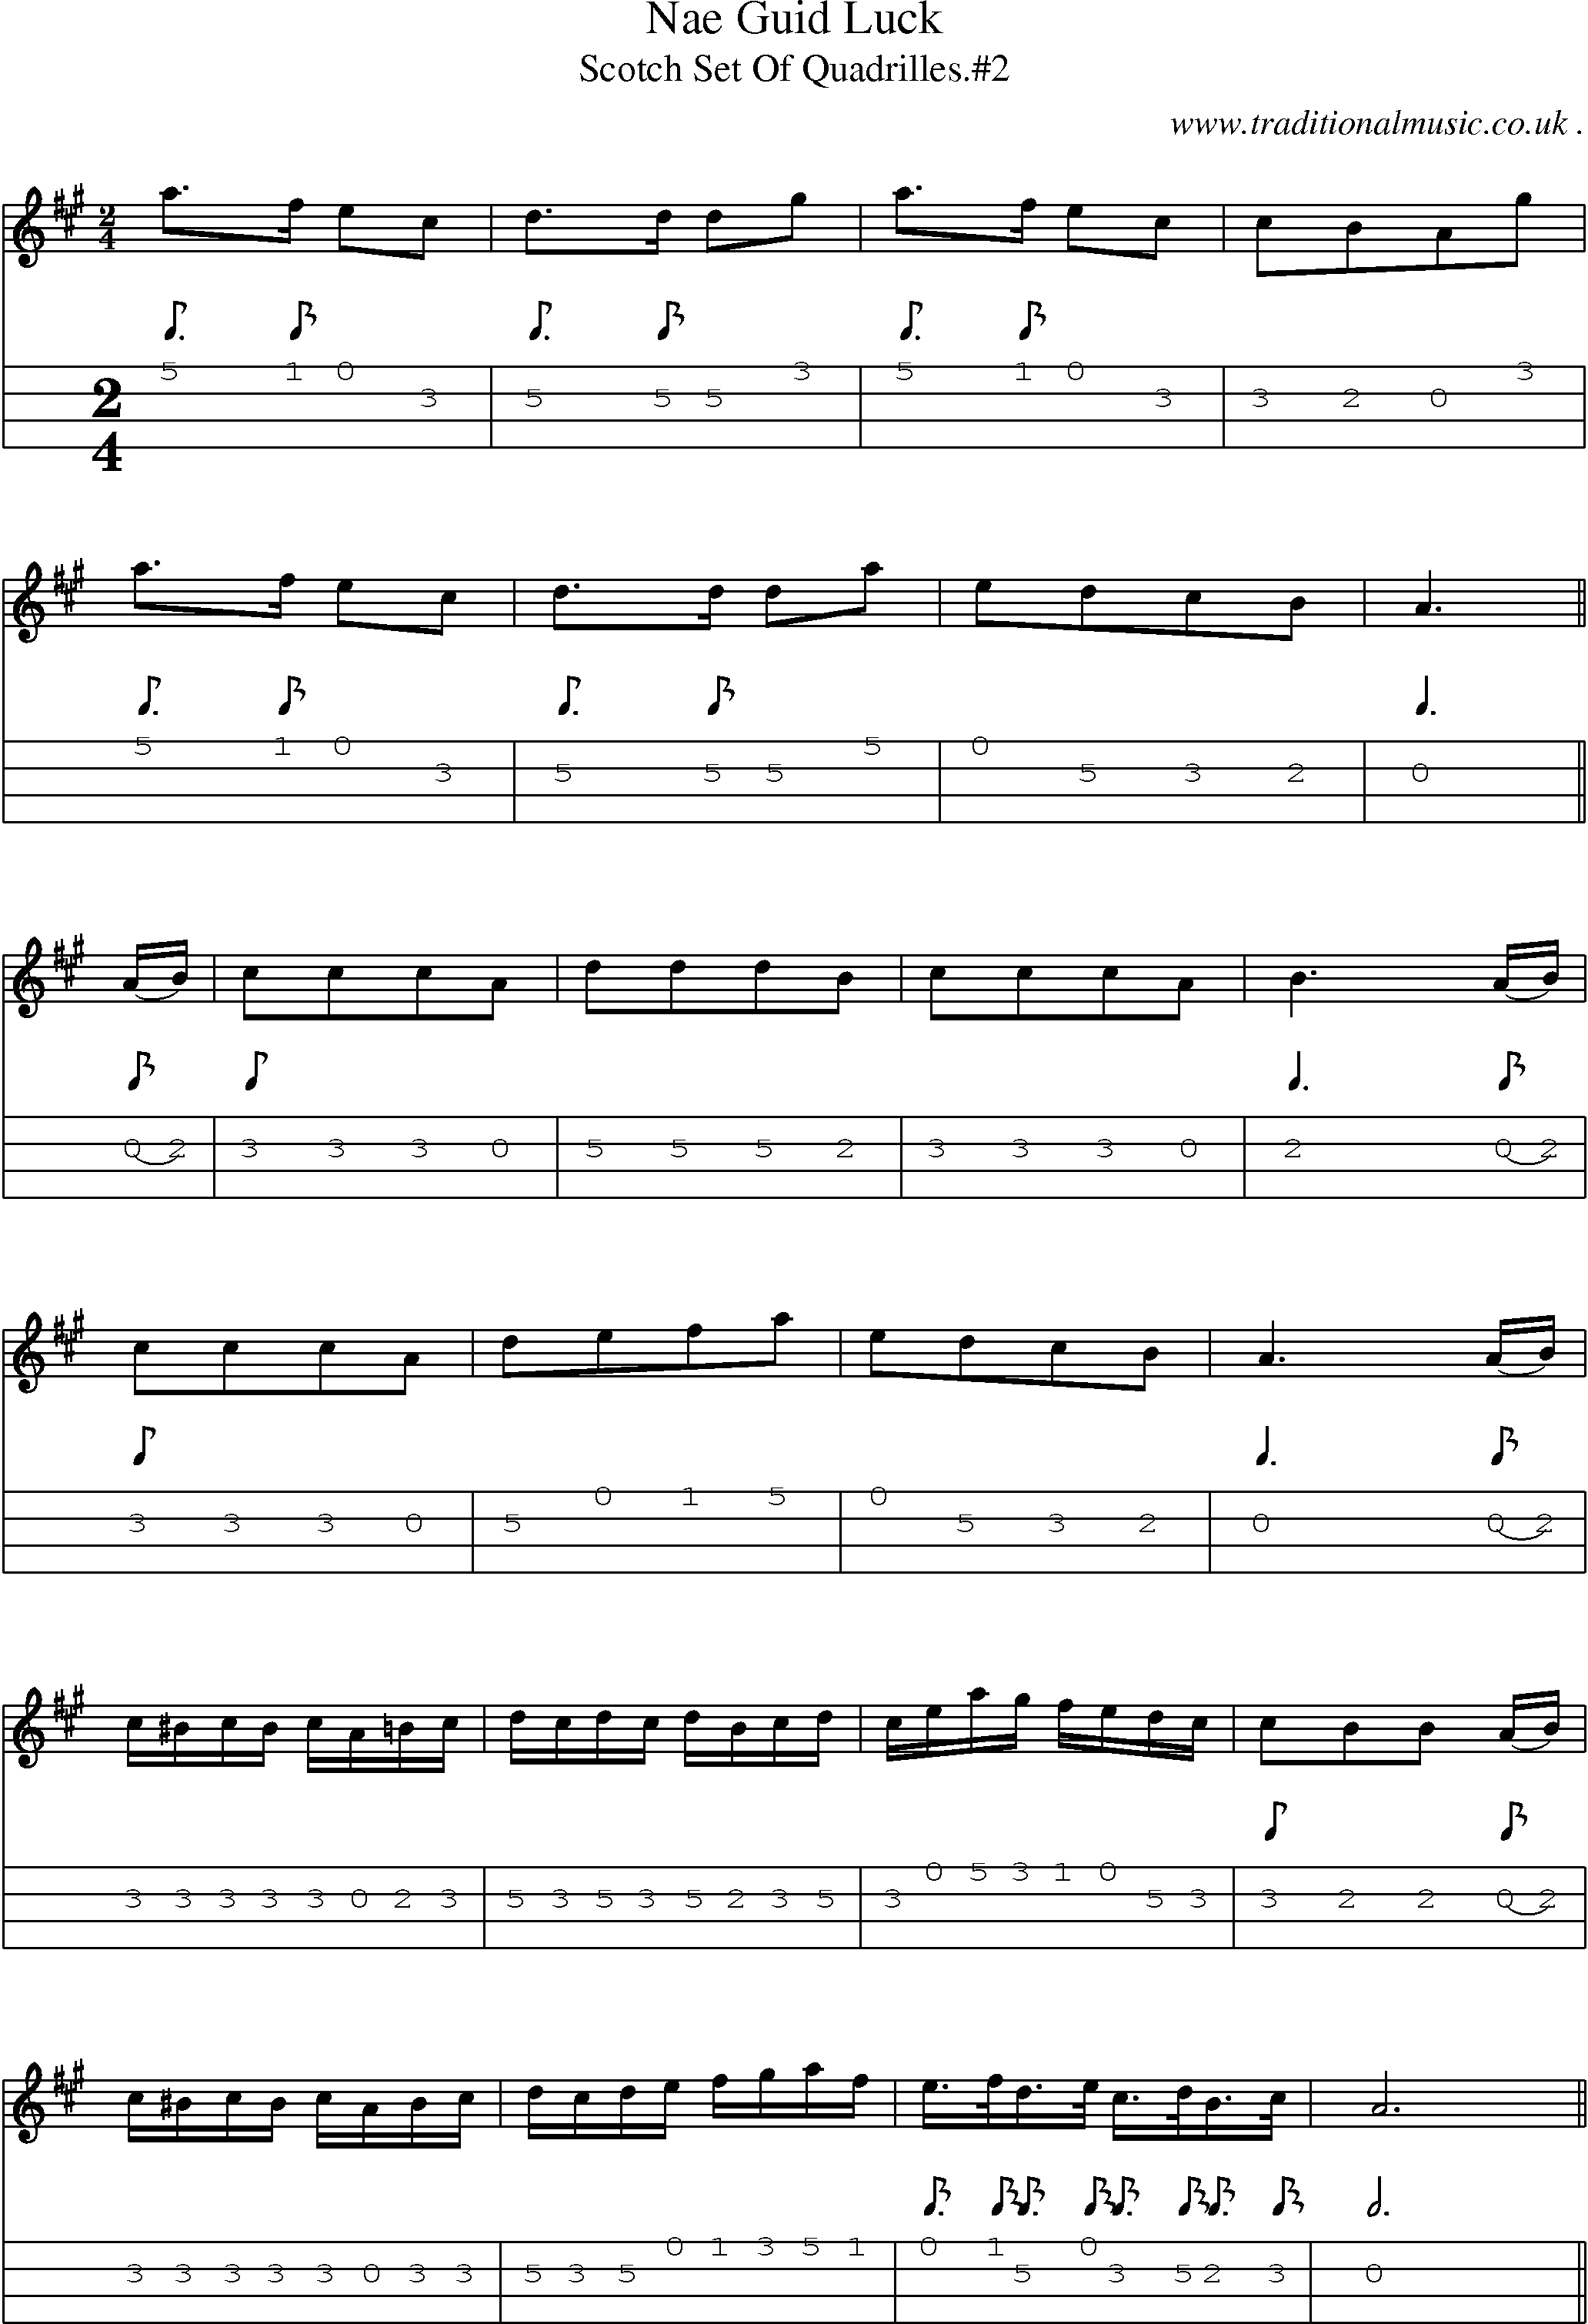 Sheet-Music and Mandolin Tabs for Nae Guid Luck